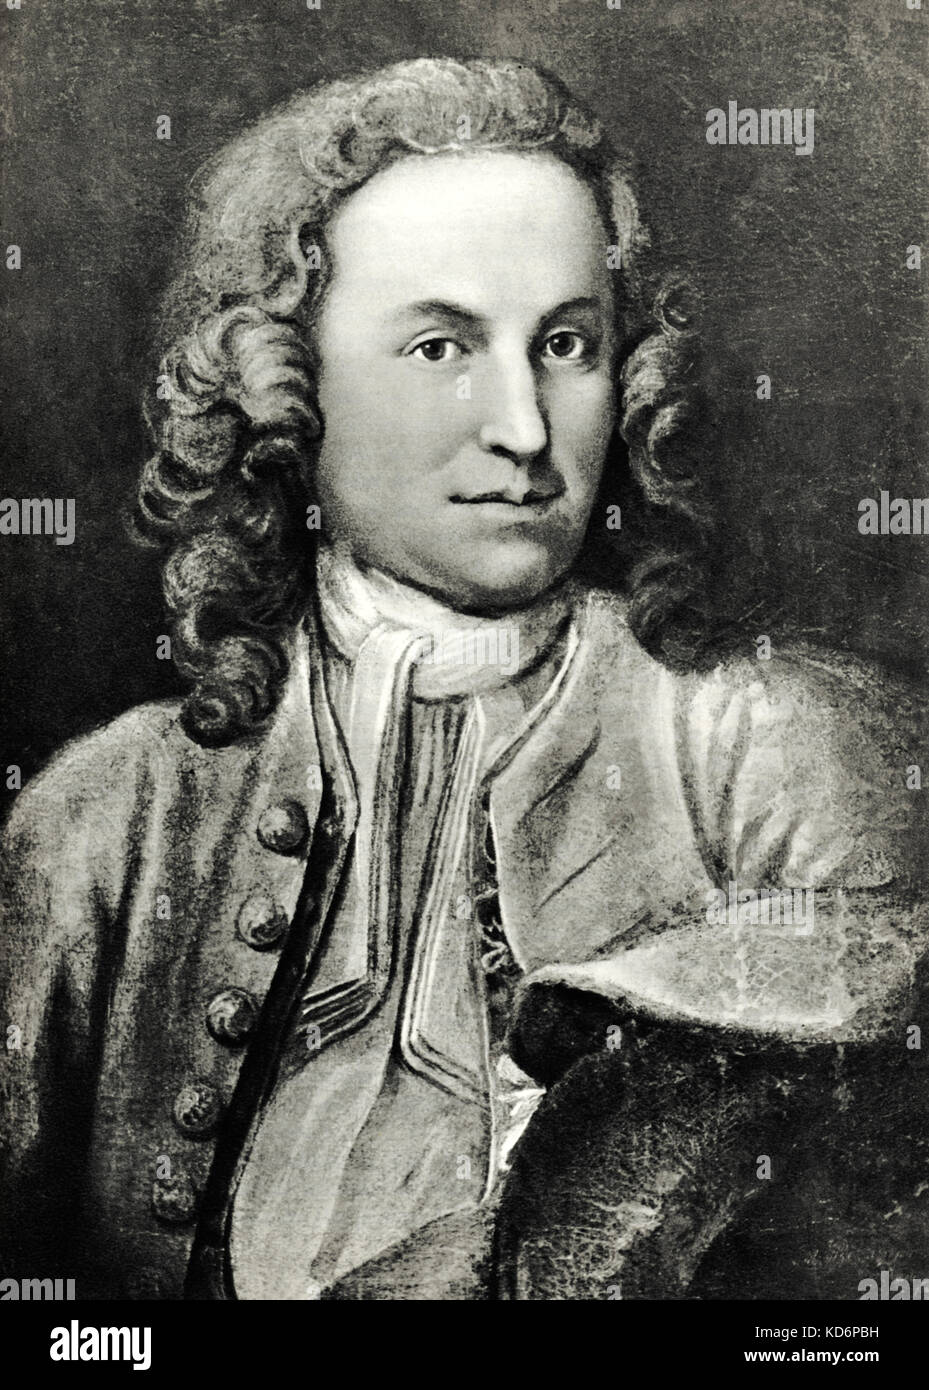 J.S. Bach portrait of German organist and composer as a young man.  1685-1750. Stock Photo